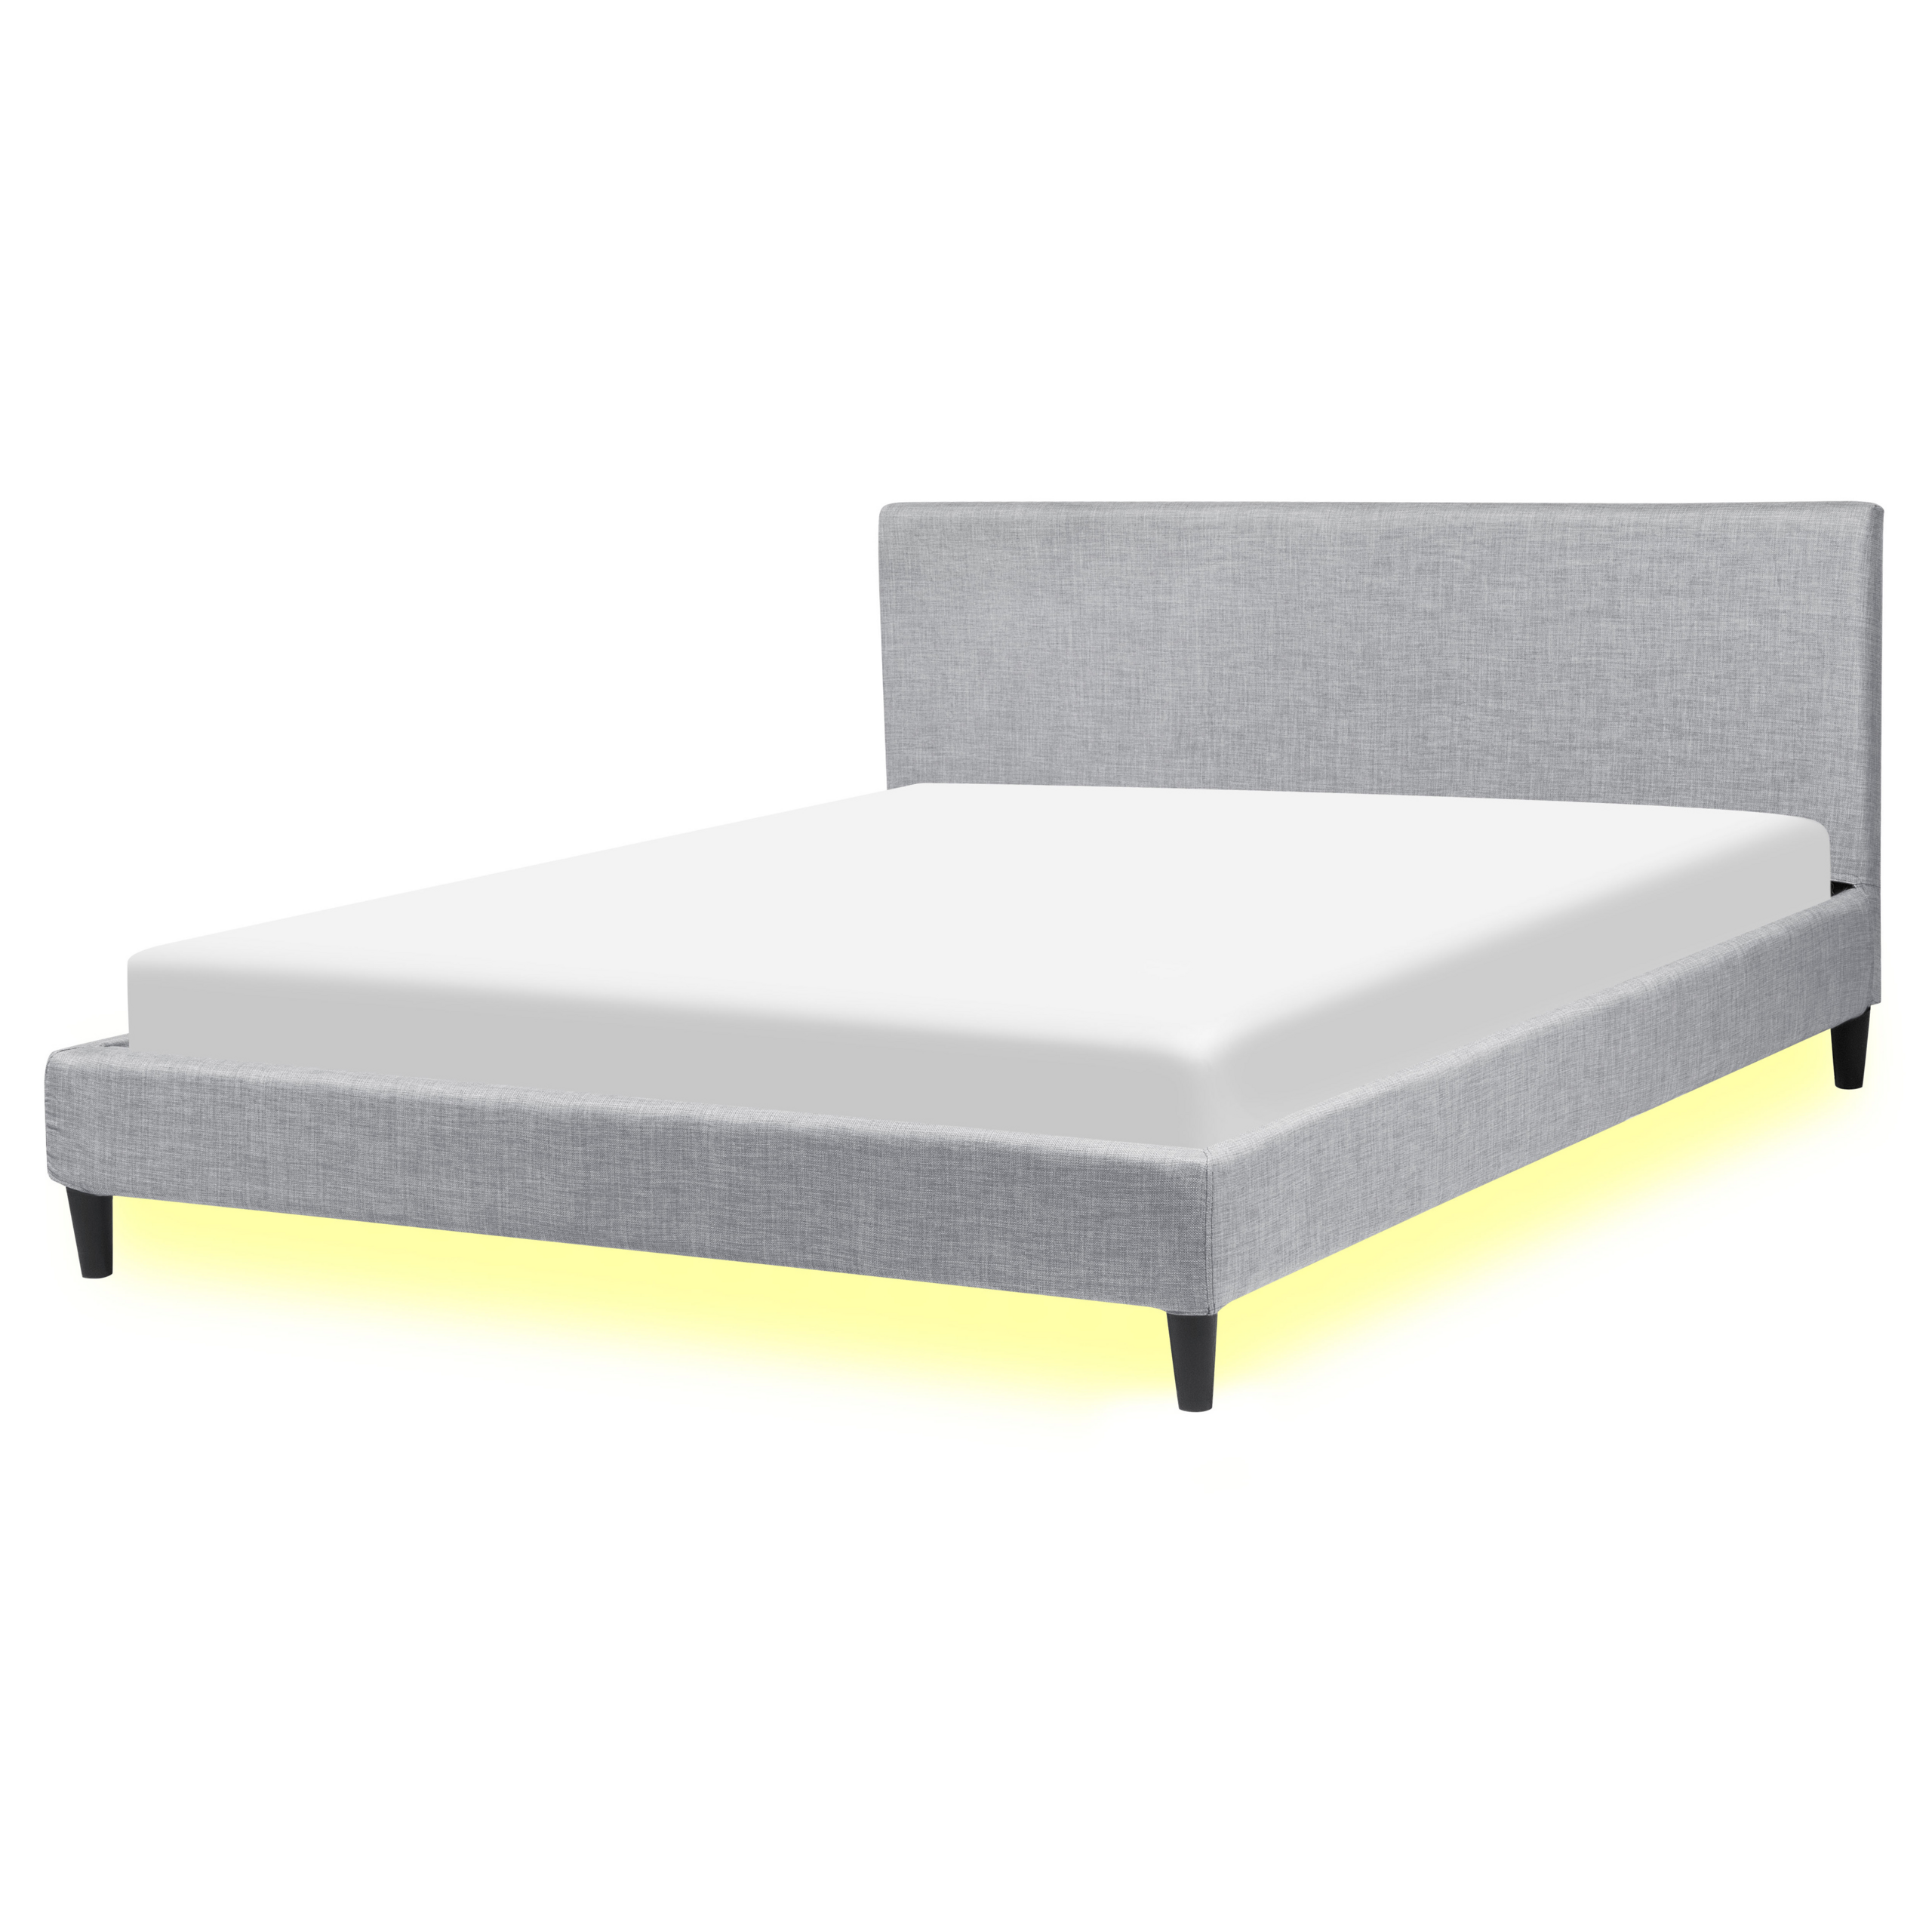 Beliani EU King Size Panel Bed 5ft3 Grey Fabric Slatted Frame with White LED Contemporary